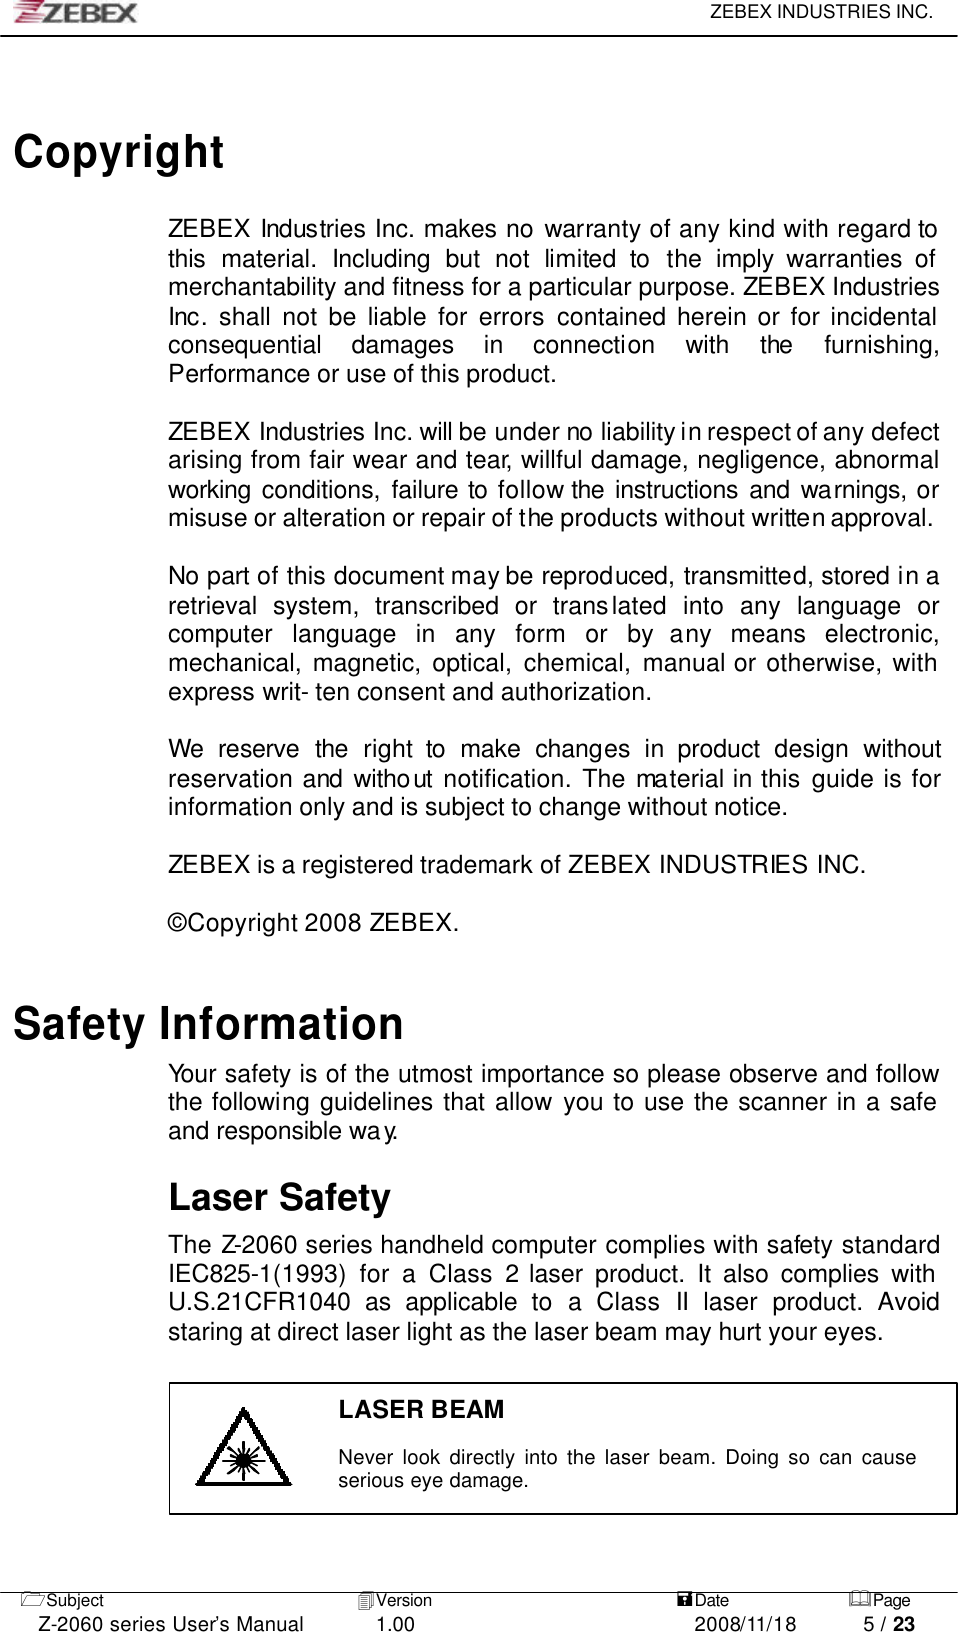     ZEBEX INDUSTRIES INC.   1Subject 4Version   =Date &amp;Page  Z-2060 series User’s Manual 1.00 2008/11/18 5 / 23    Copyright  ZEBEX Industries Inc. makes no warranty of any kind with regard to this material. Including but not limited to the imply warranties of merchantability and fitness for a particular purpose. ZEBEX Industries Inc. shall not be liable for errors contained herein or for incidental consequential damages in connection with the furnishing, Performance or use of this product.  ZEBEX Industries Inc. will be under no liability in respect of any defect arising from fair wear and tear, willful damage, negligence, abnormal working conditions, failure to follow the instructions and warnings, or misuse or alteration or repair of the products without written approval.  No part of this document may be reproduced, transmitted, stored in a retrieval system, transcribed or translated into any language or computer language in any form or by any means electronic, mechanical, magnetic, optical, chemical, manual or otherwise, with express writ- ten consent and authorization.  We reserve the right to make changes in product design without reservation and without notification. The material in this guide is for information only and is subject to change without notice.  ZEBEX is a registered trademark of ZEBEX INDUSTRIES INC.  © Copyright 2008 ZEBEX.    Safety Information Your safety is of the utmost importance so please observe and follow the following guidelines that allow you to use the scanner in a safe and responsible way.   Laser Safety The Z-2060 series handheld computer complies with safety standard IEC825-1(1993) for a Class 2 laser product. It also complies with U.S.21CFR1040 as applicable to a Class II laser product. Avoid staring at direct laser light as the laser beam may hurt your eyes.   LASER BEAM  Never look directly into the laser beam. Doing so can cause serious eye damage.    